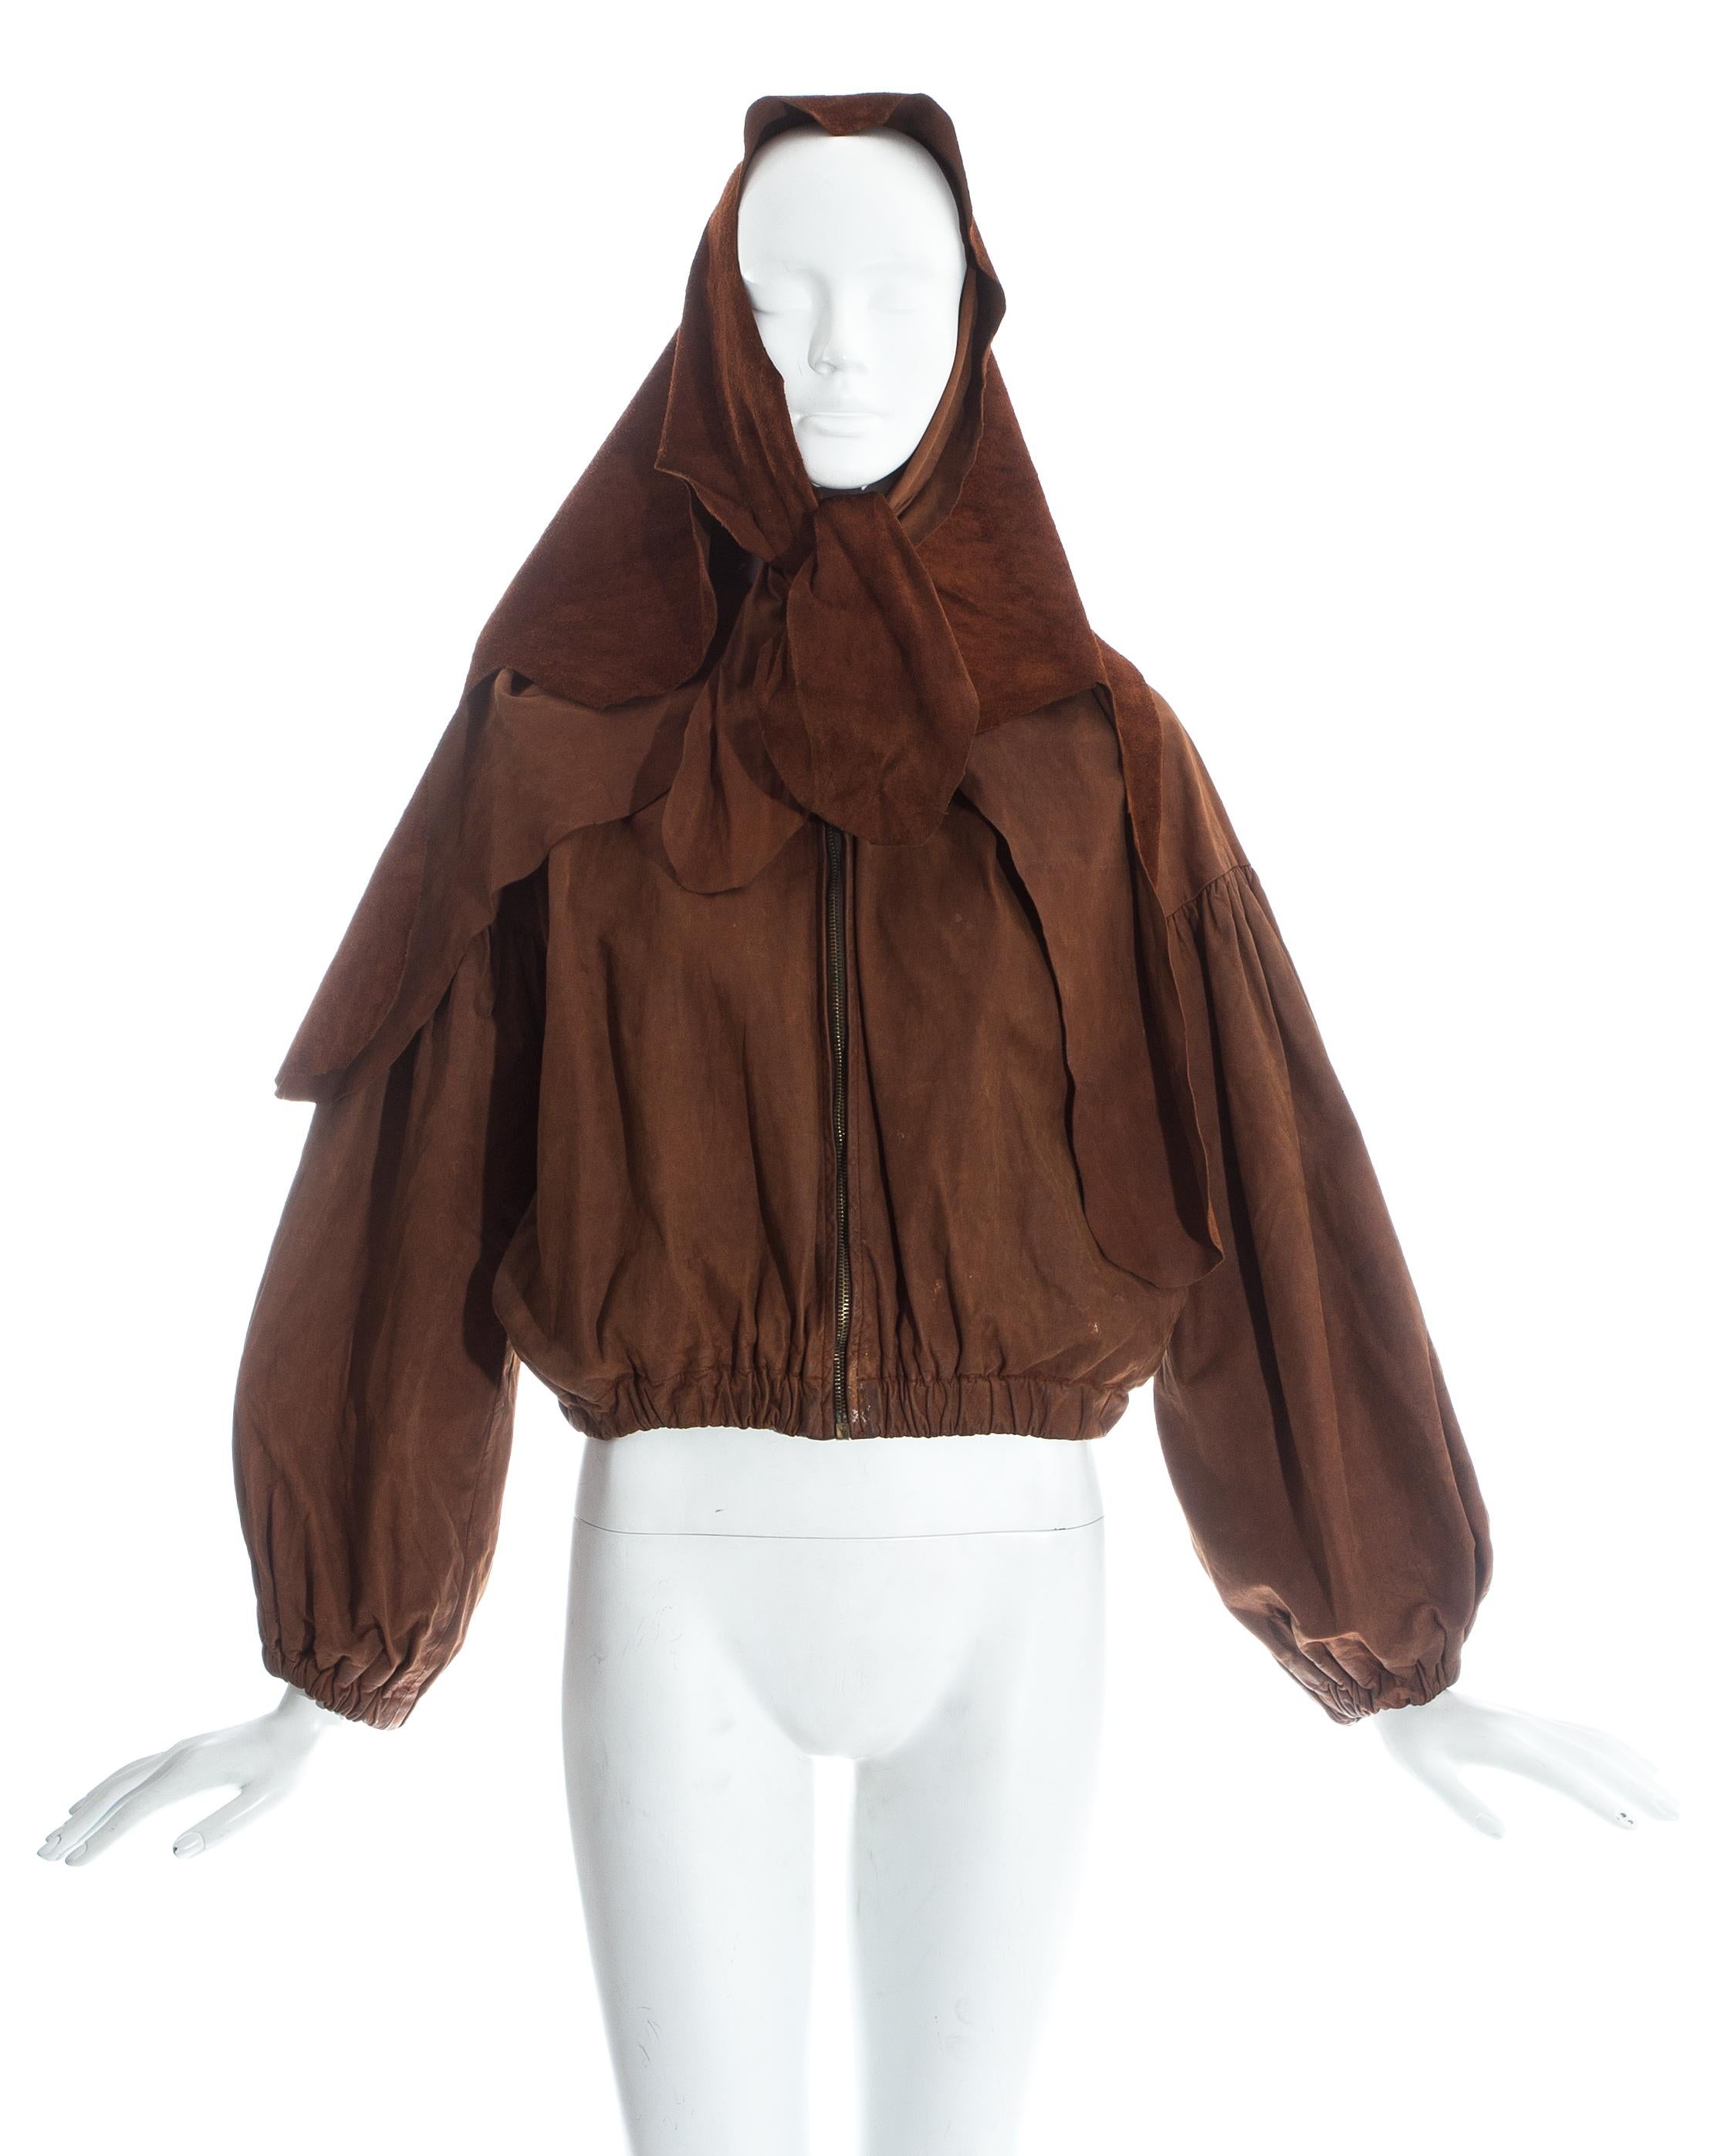 Vivienne Westwood brown leather bomber jacket with detachable cape / hood. Elastic hem and cuffs.

Spring-Summer 1992